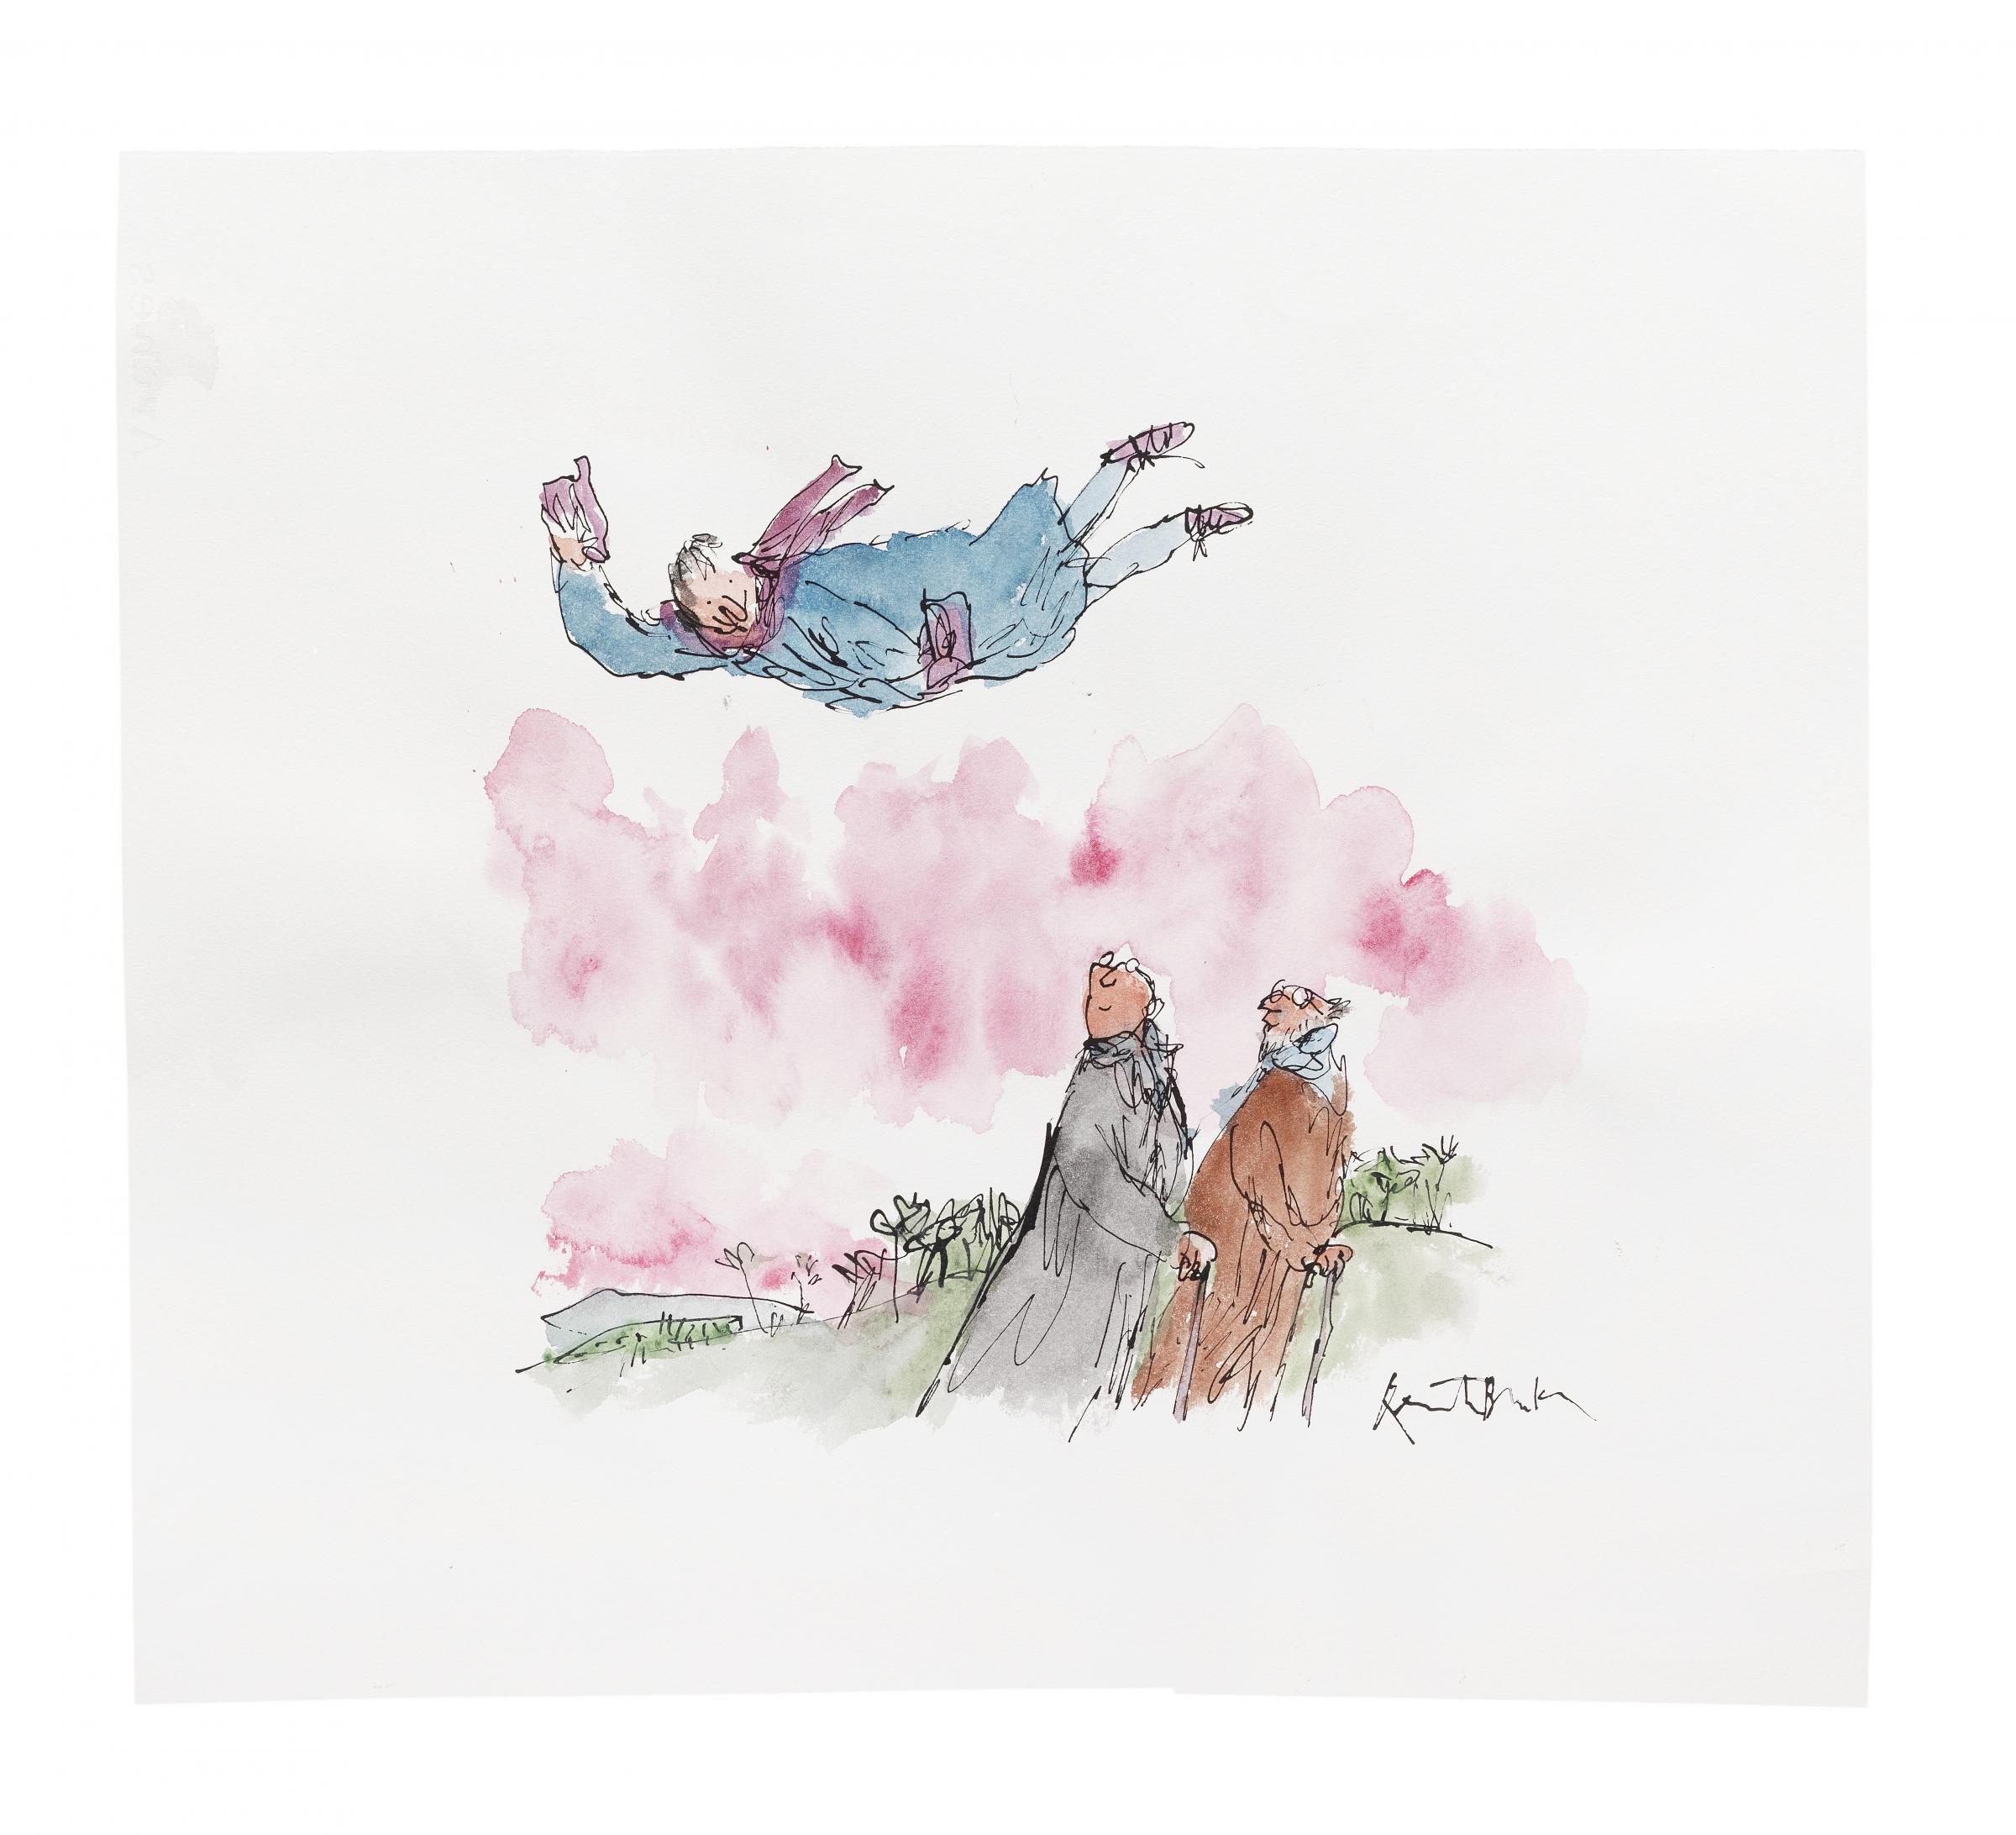 Quentin Blake auction raises funds for Centre for Illustration